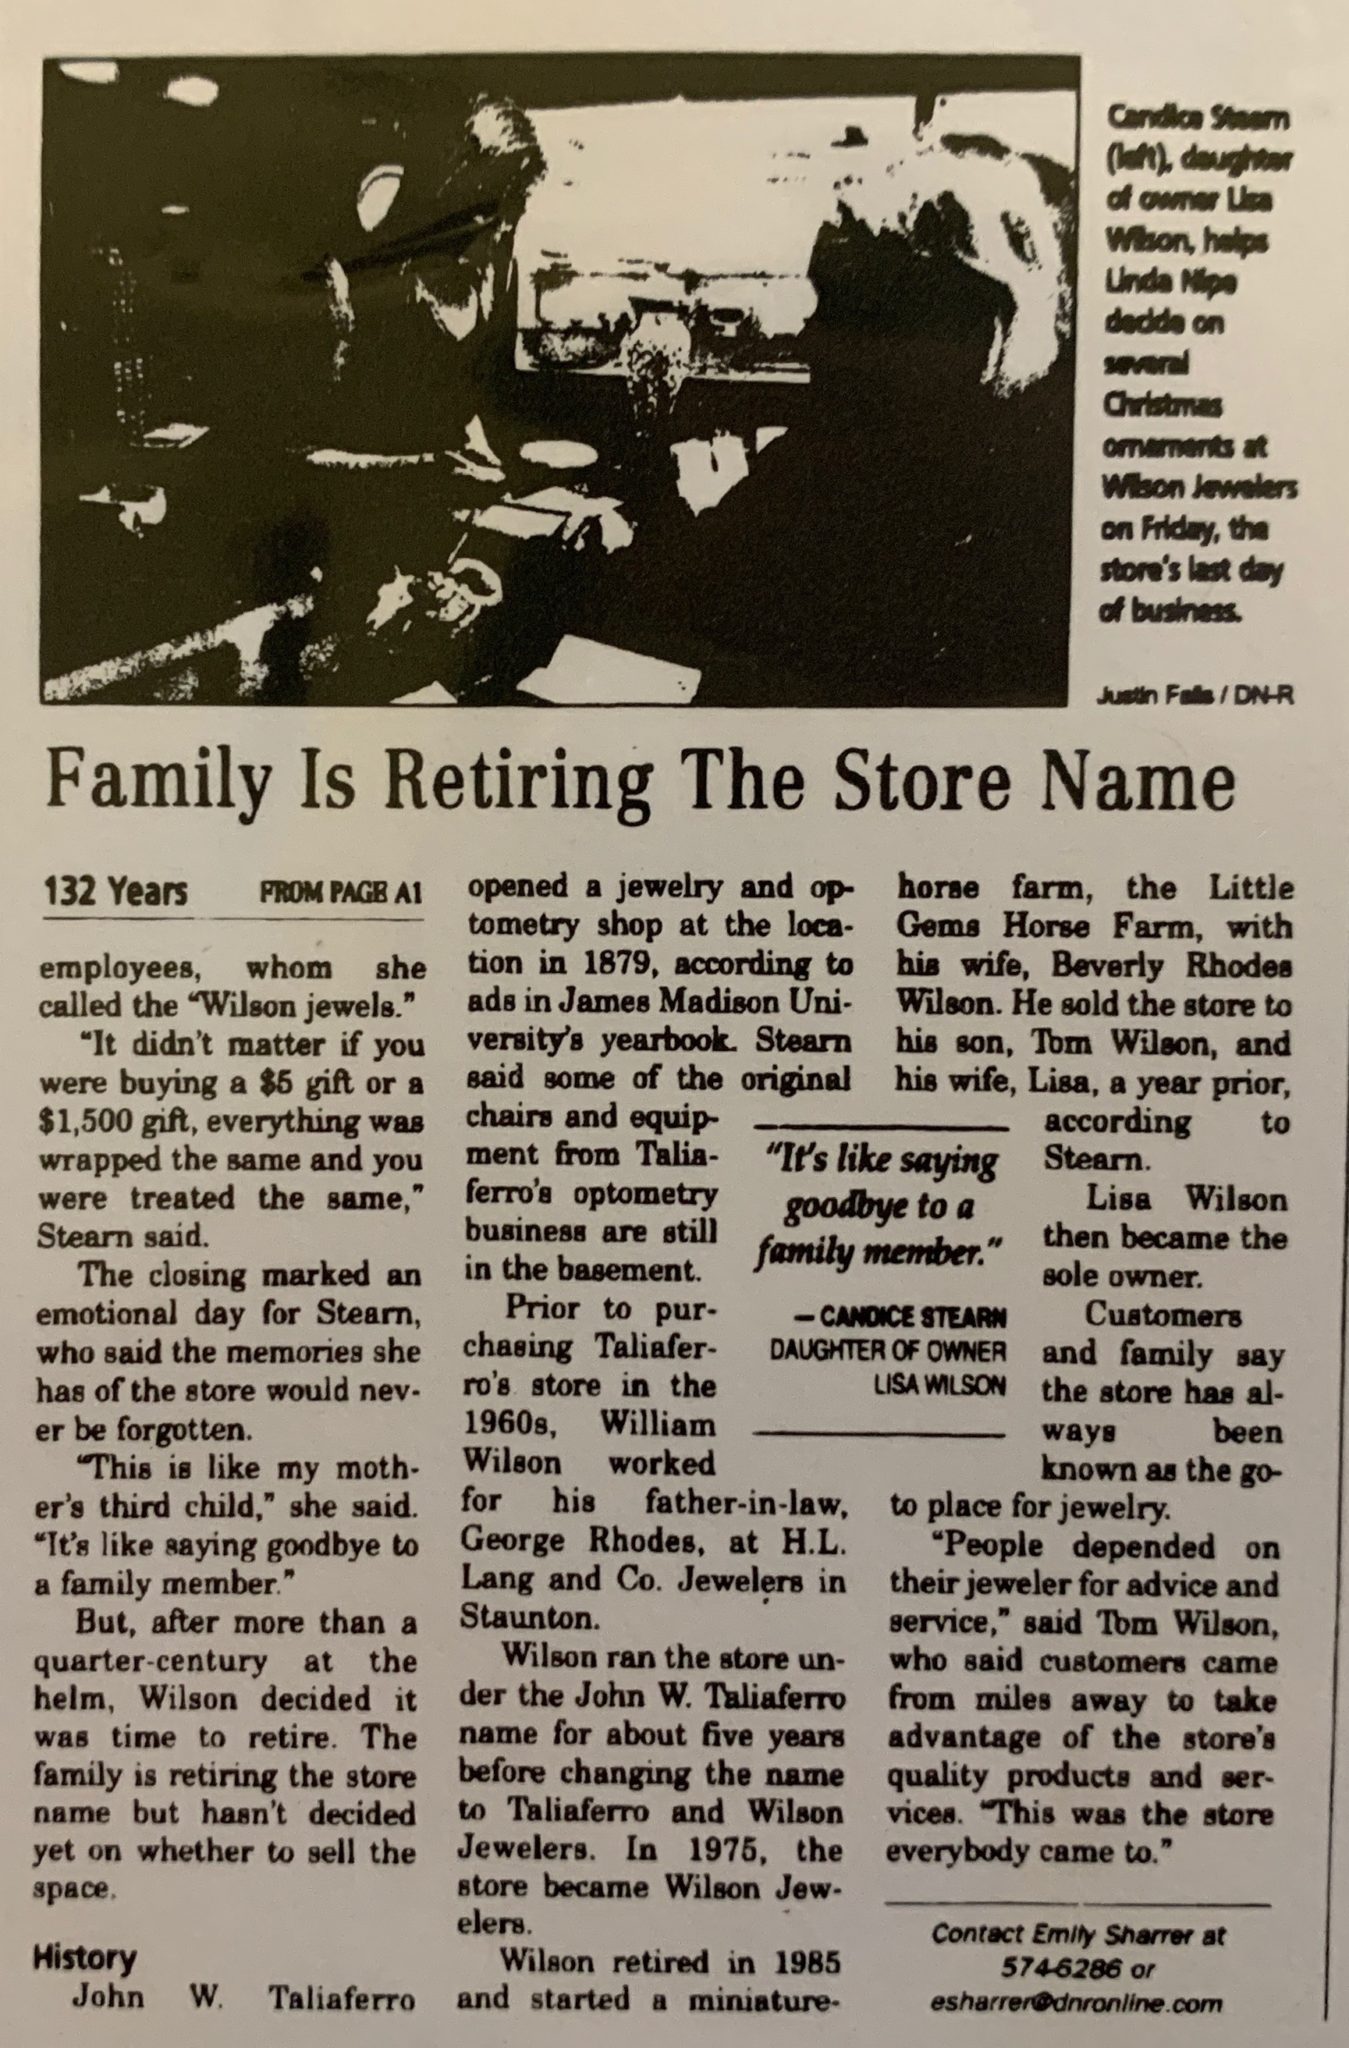 Newspaper clipping about Wilson Jewelers and Avis Drug Store